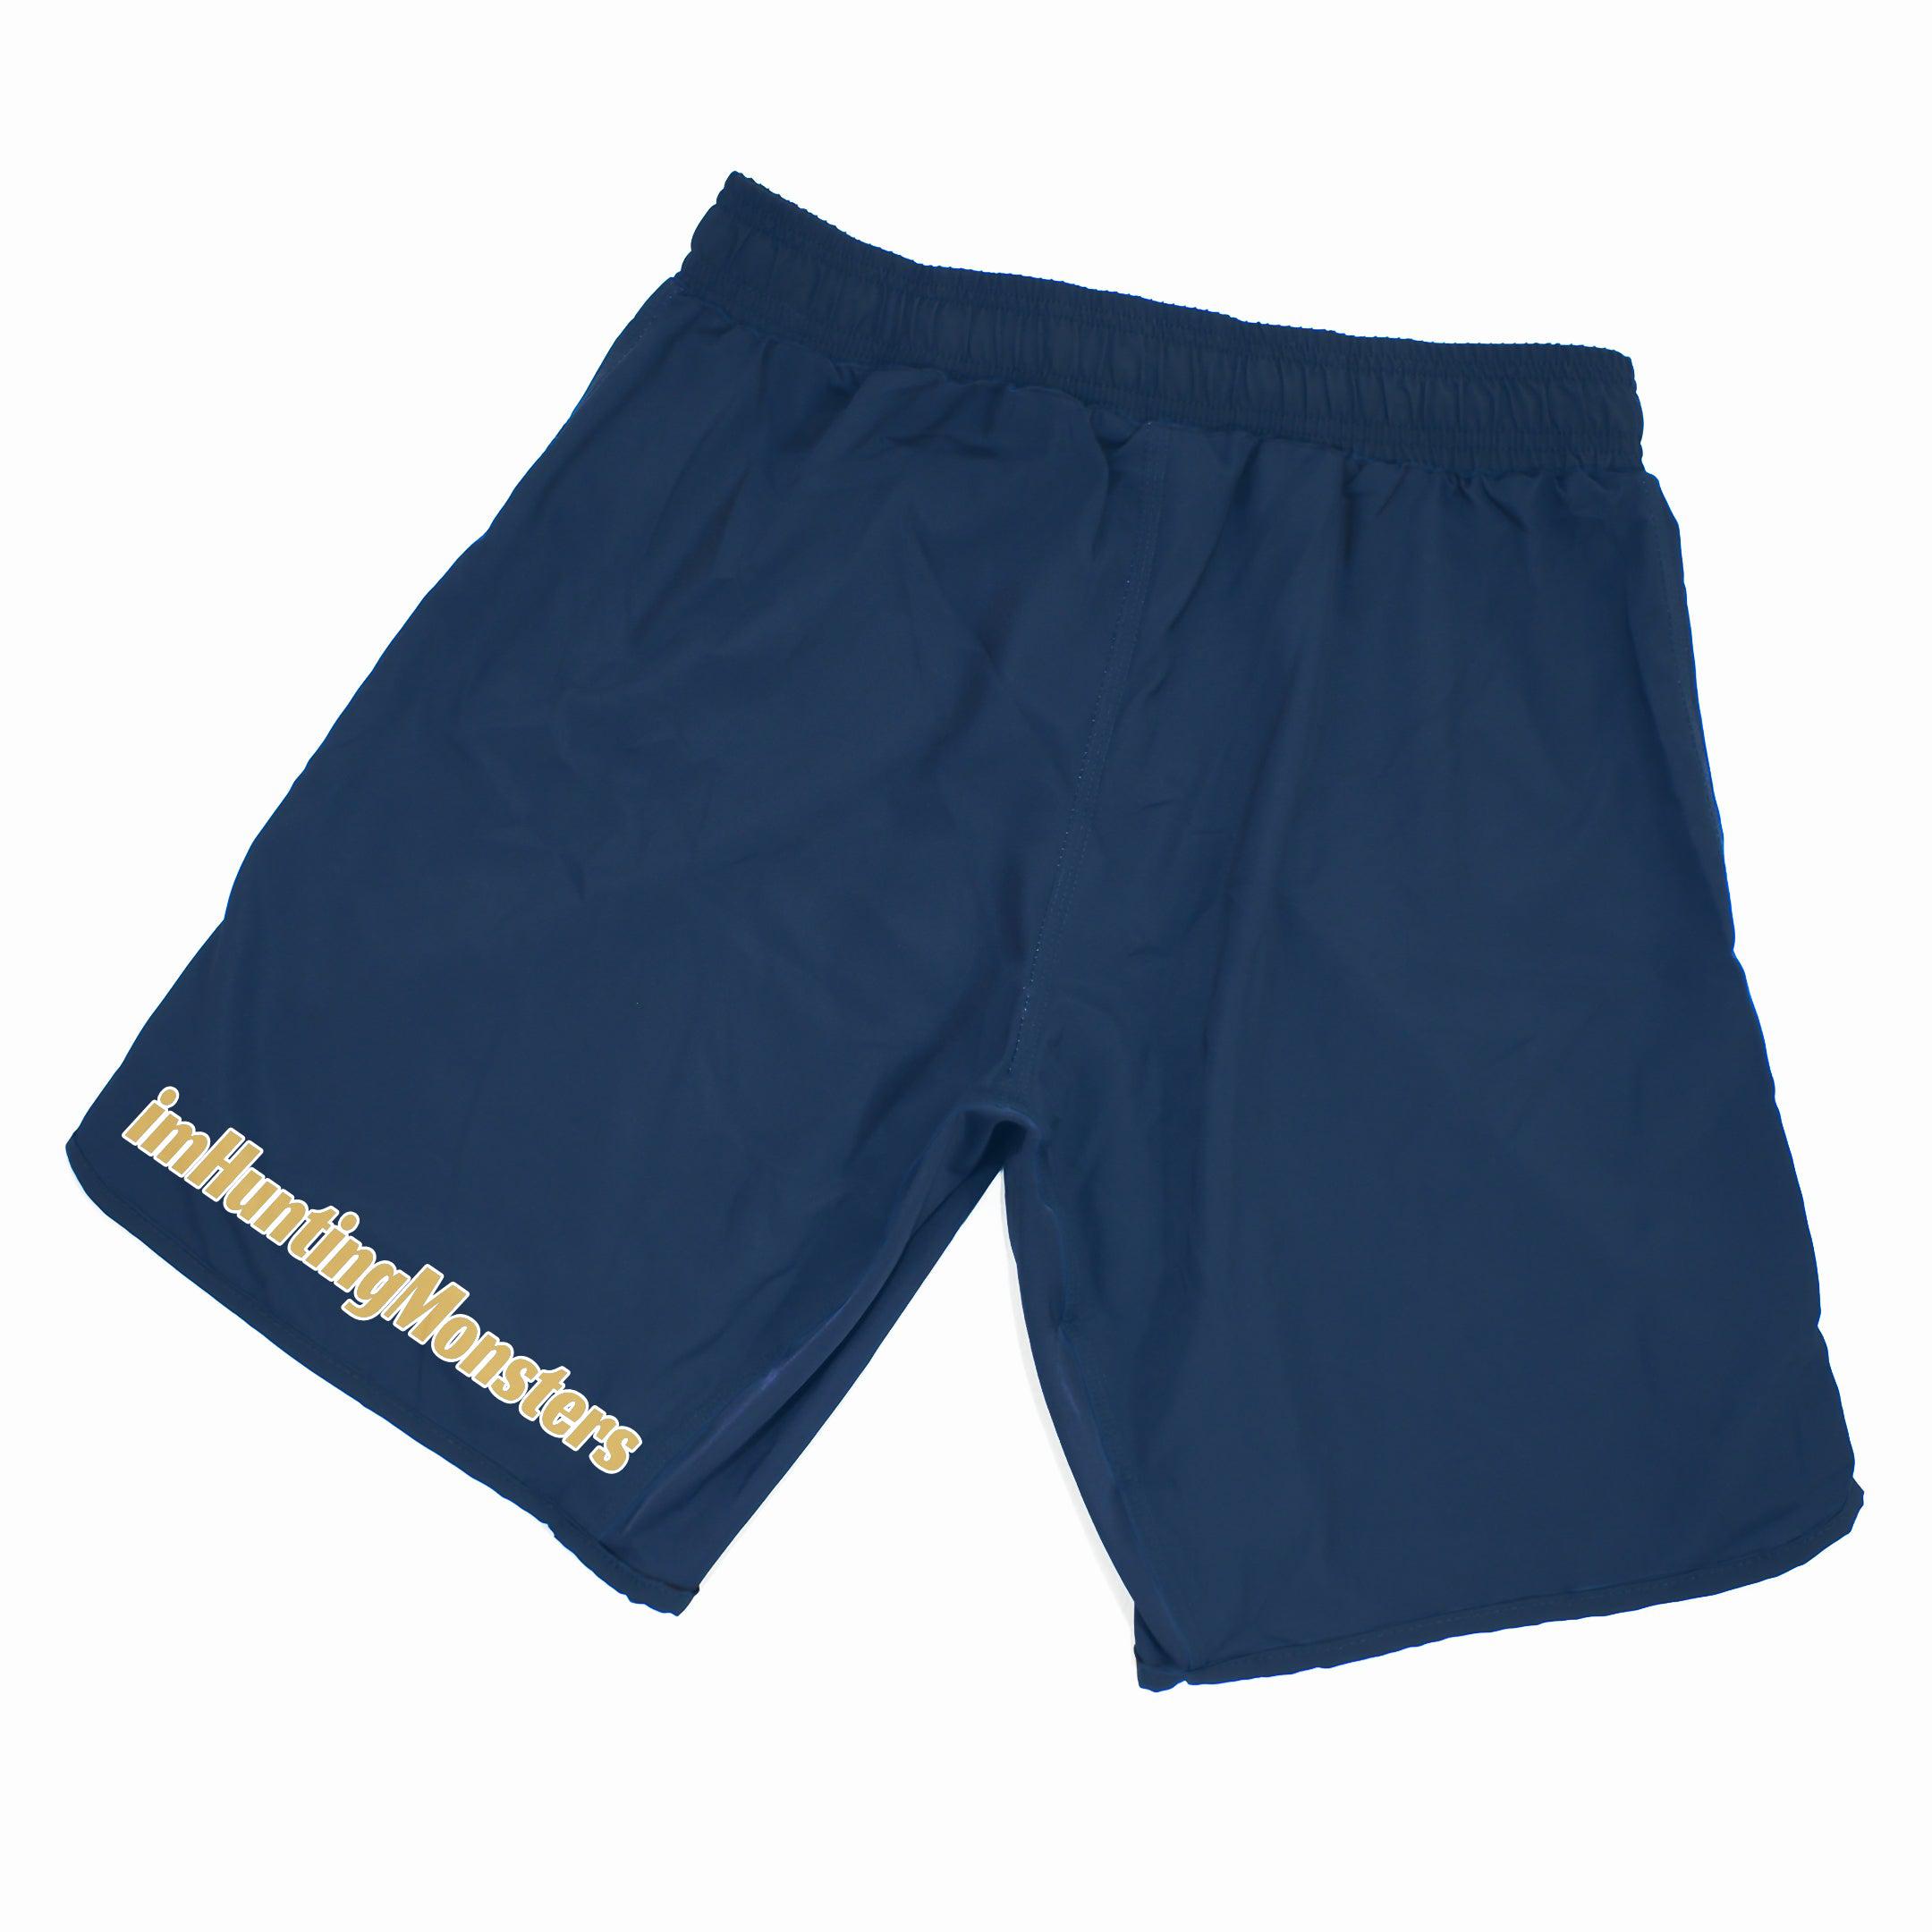 imHuntingMonsters Pirate Grappling Shorts (Blue)